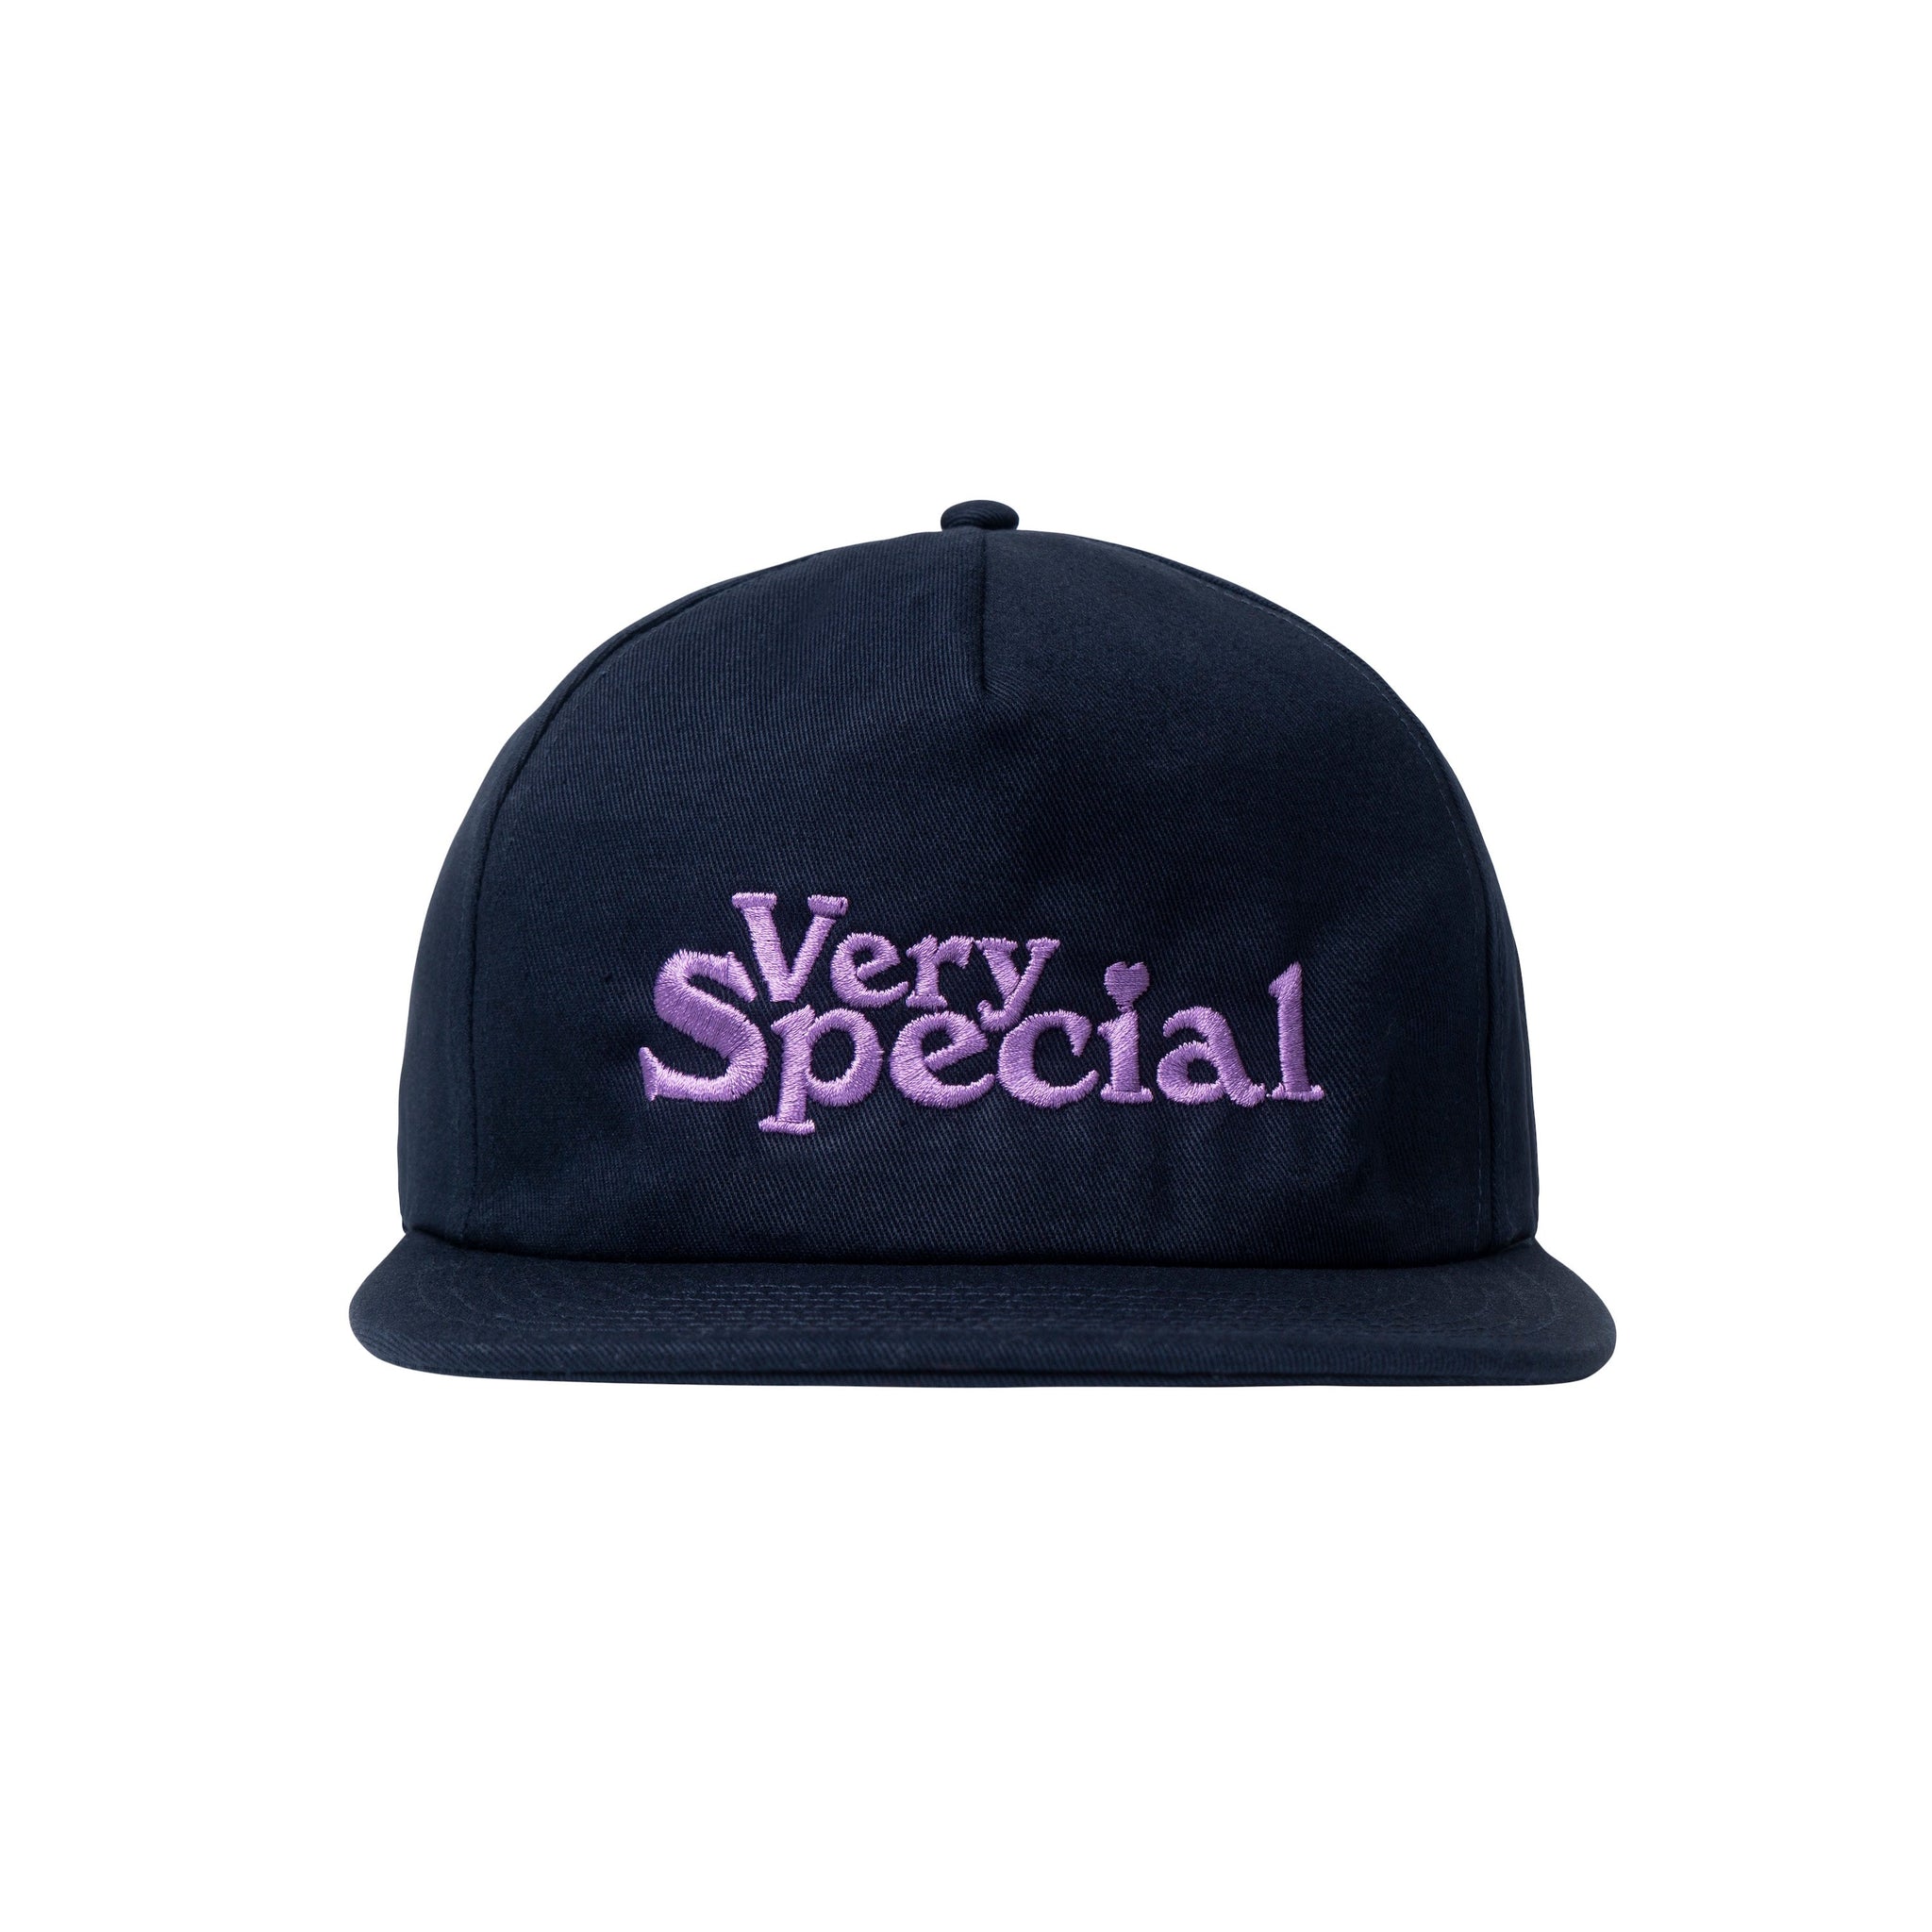 Very Special Love Hat - Navy